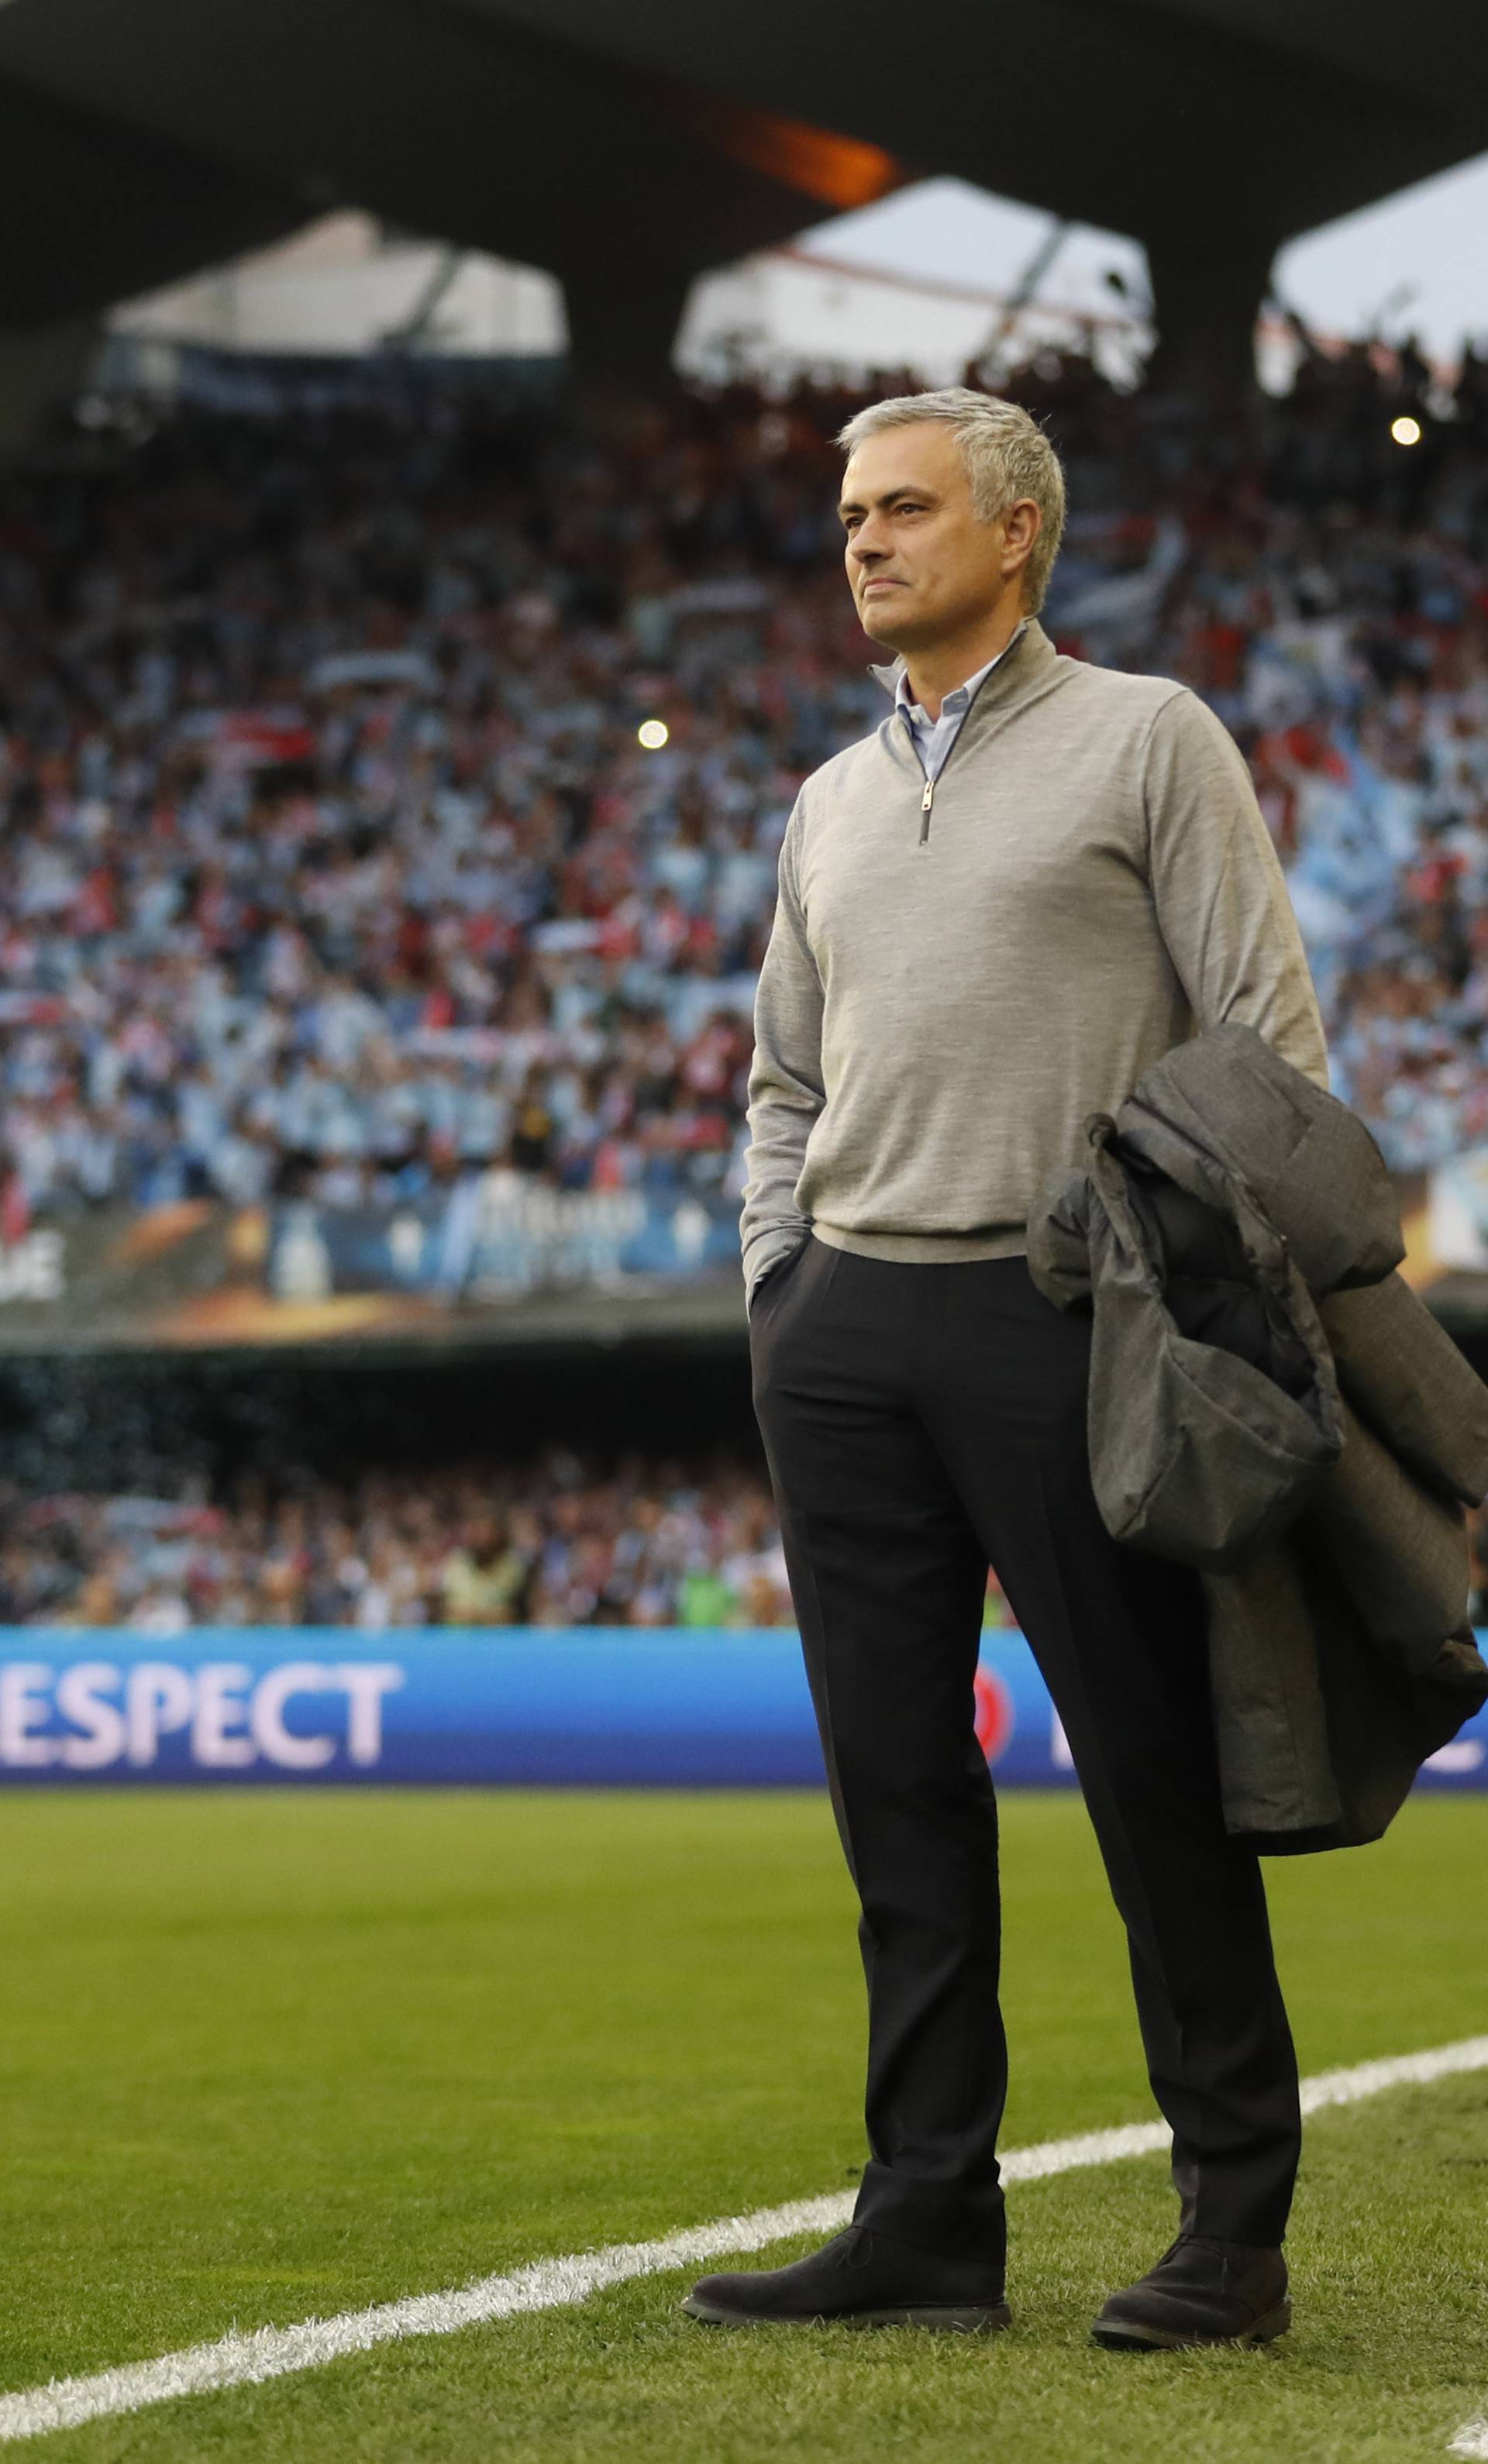 Manchester United manager Jose Mourinho before the match